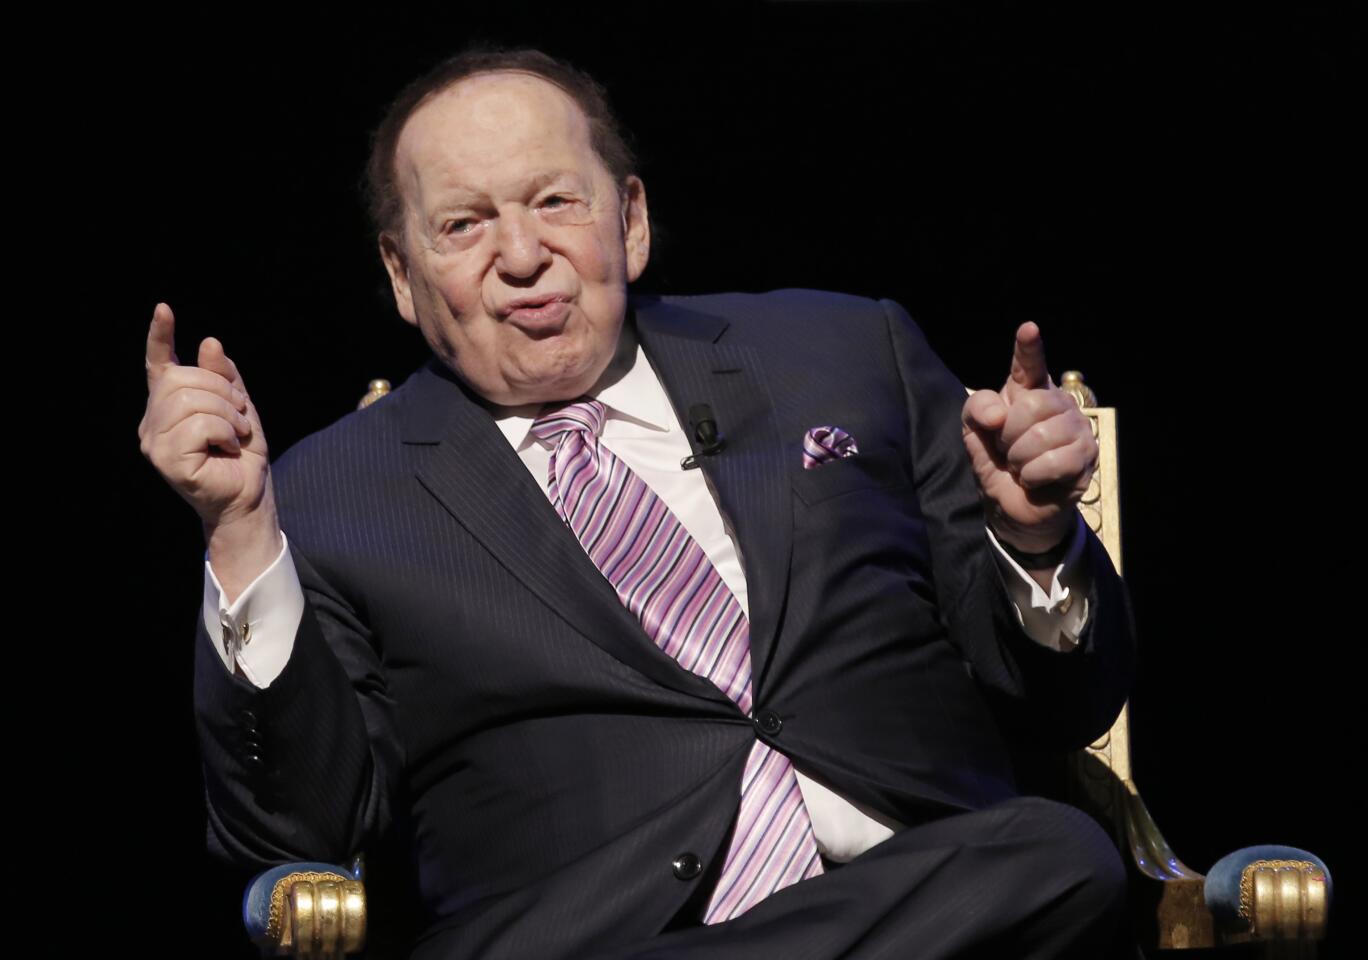 Sheldon Adelson points his fingers while speaking.